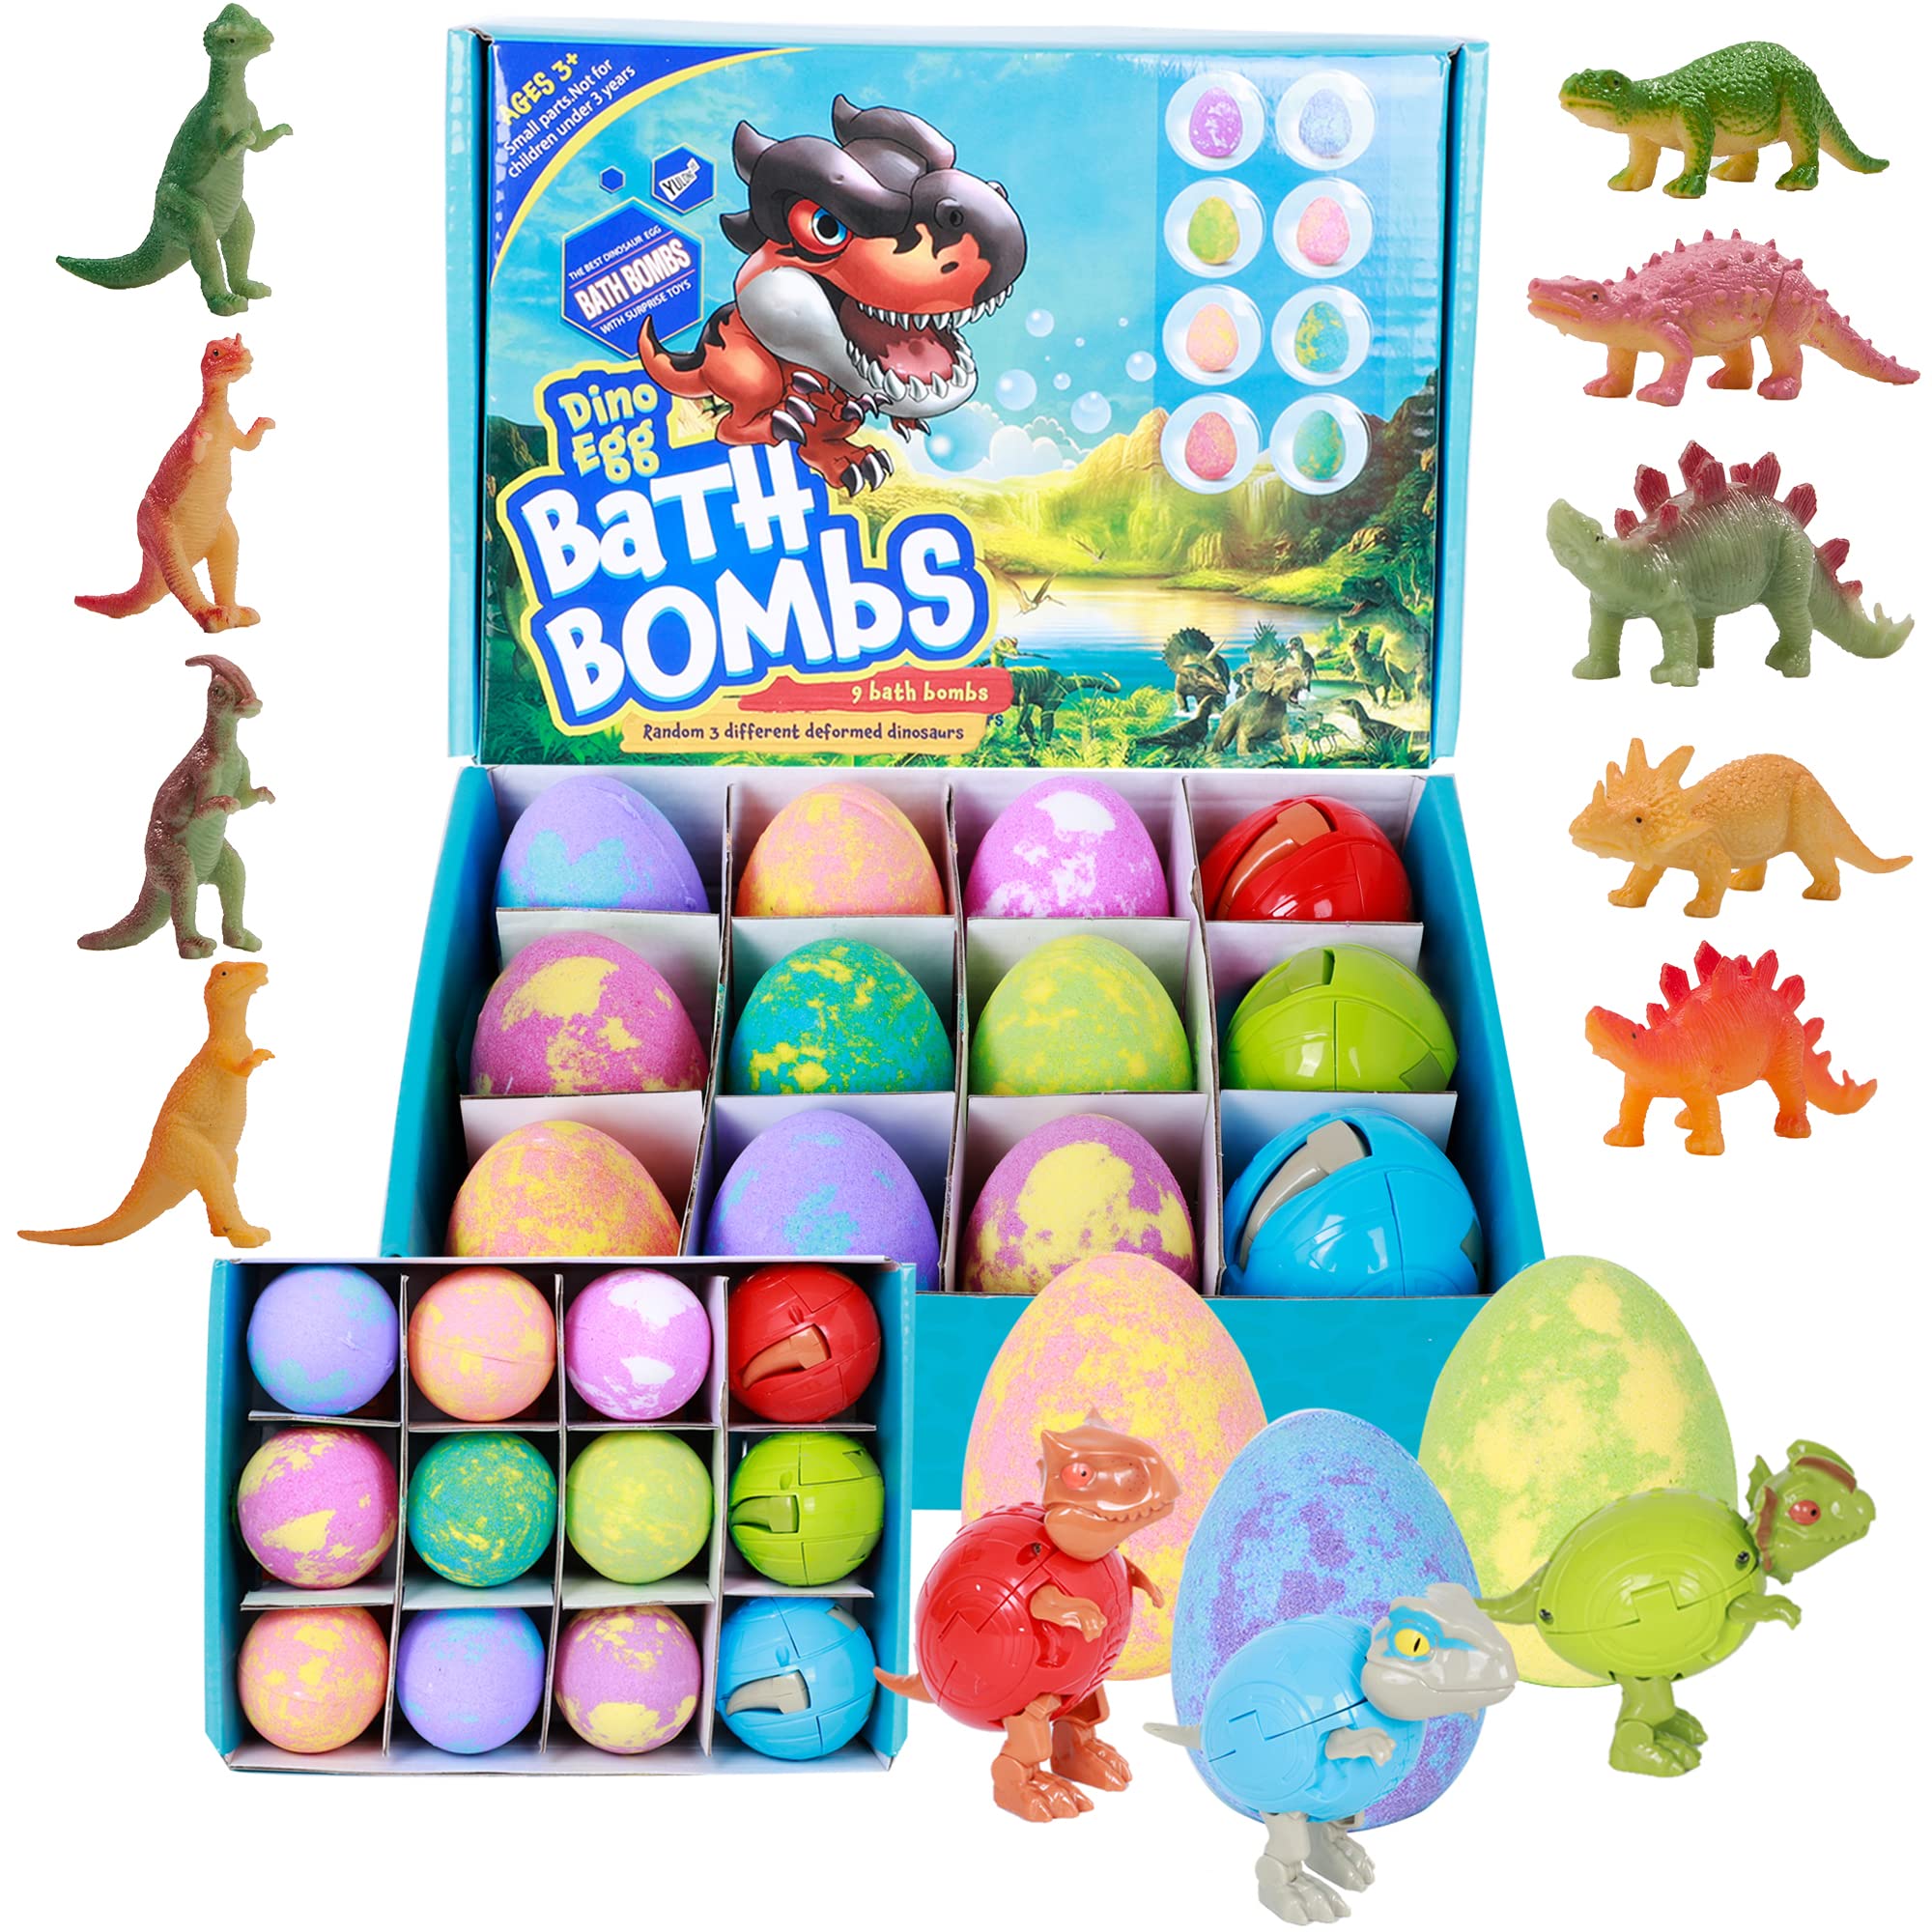 YULONG Lab Bath Bombs for Kids with Toys Inside Surprise, Dino Egg Bath Bomb Kit with Dinosaur Toy Organic and Natural Bath Fizz Spa Bath Set Gift, for Birthday Easter Christmas Boys and Girls Gifts